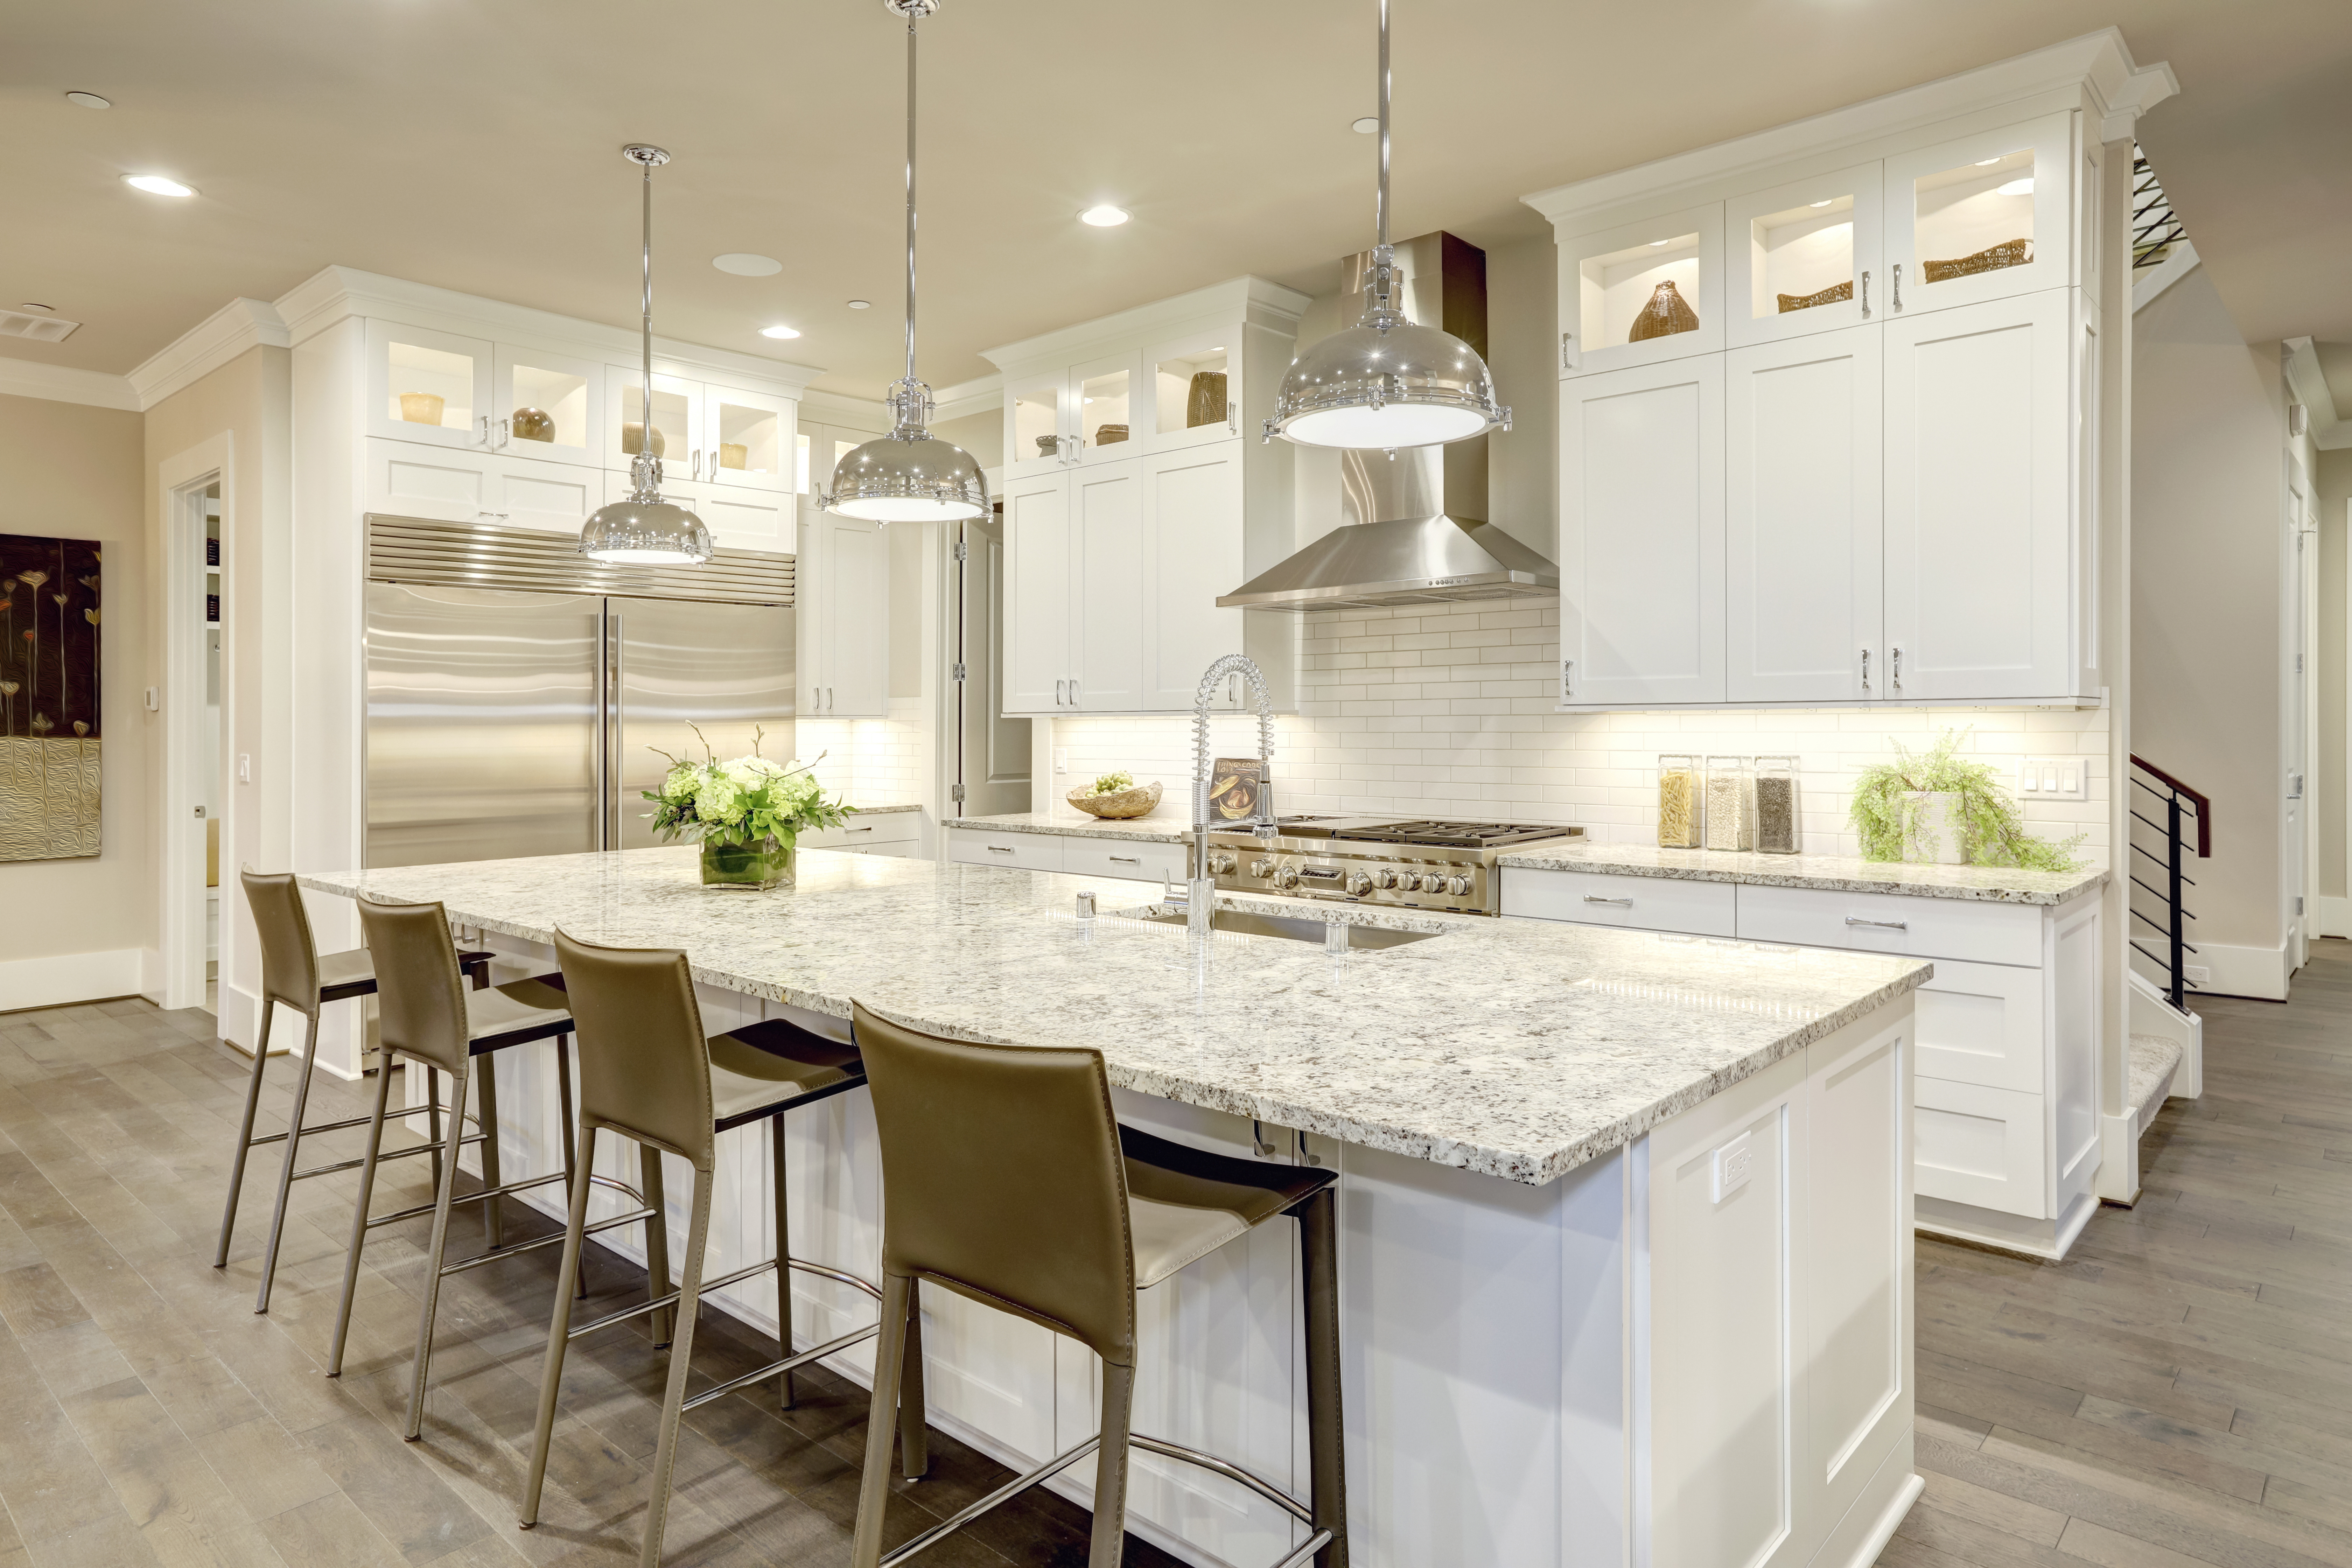 White kitchen design features large bar style kitchen island with granite countertop | Carpet Barn